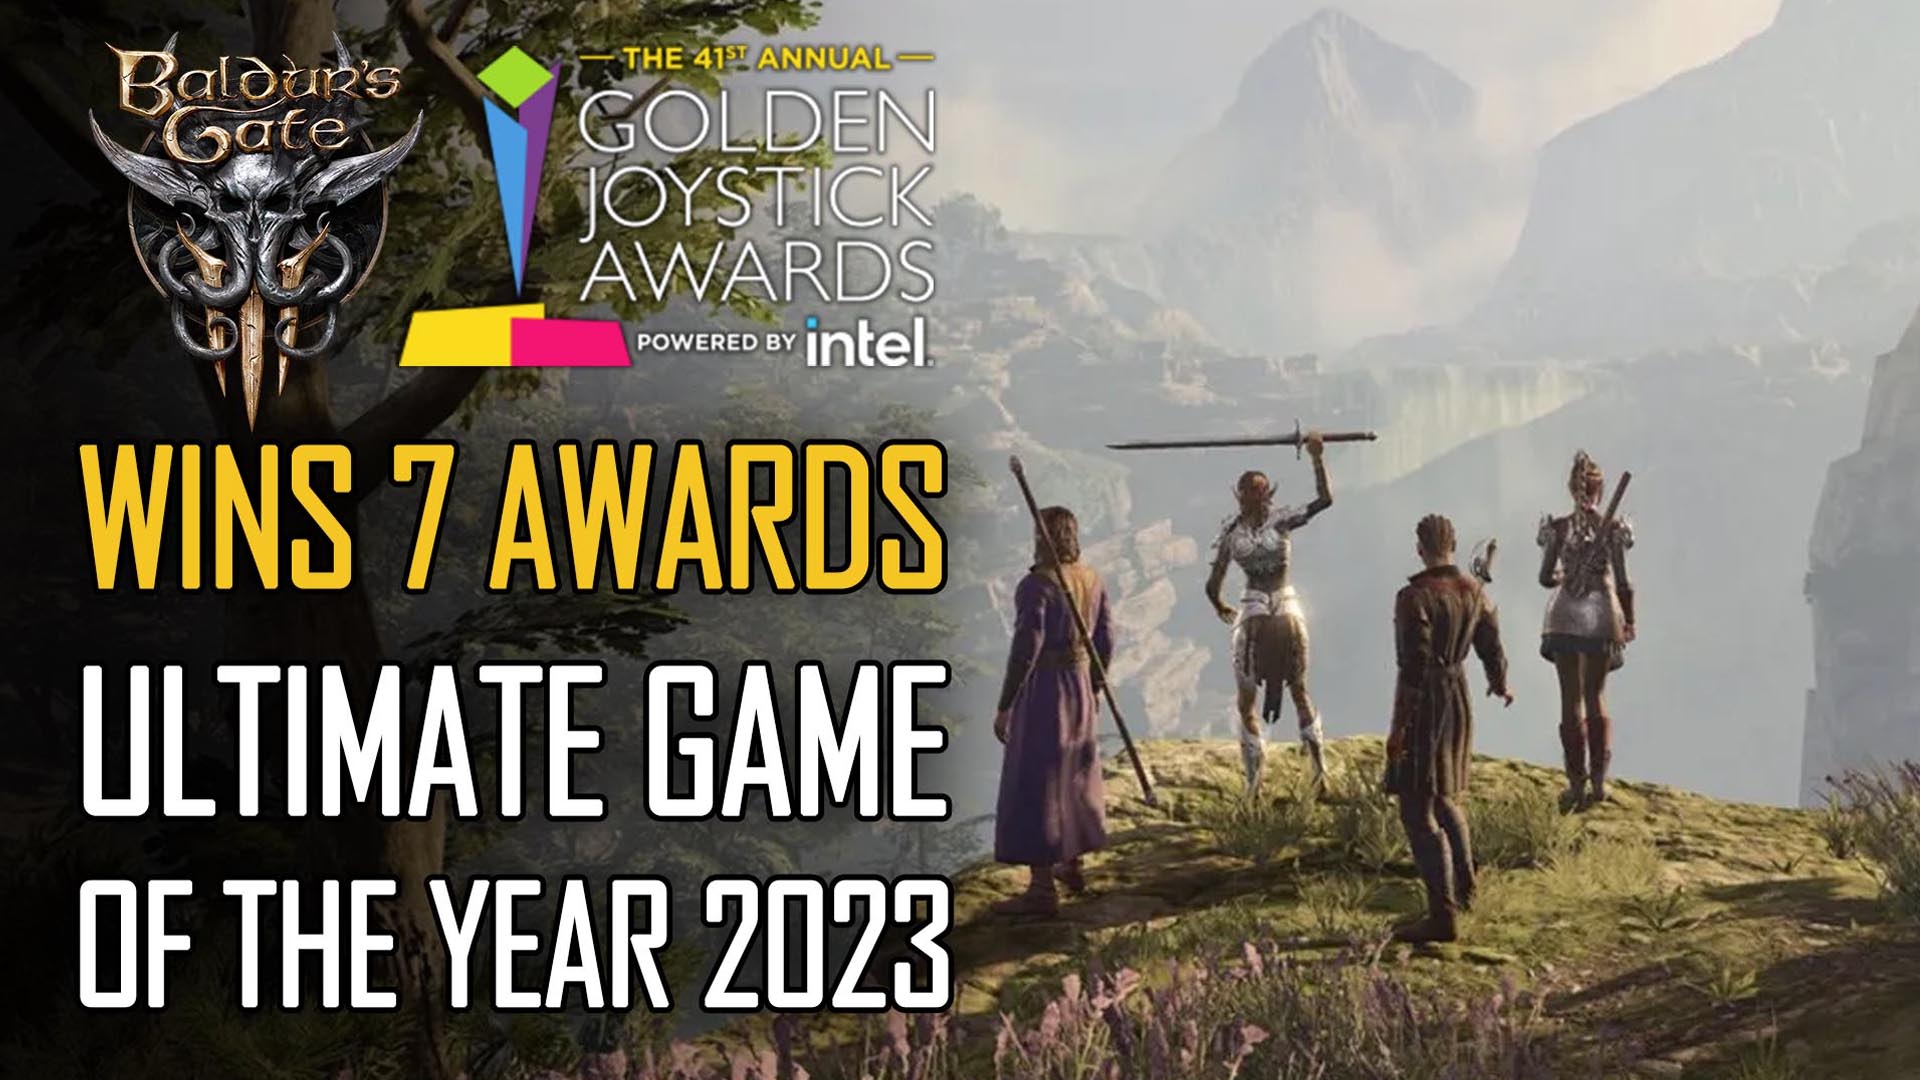 Baldurs Gate 3 wins game of the year at 2023's Game Awards – an